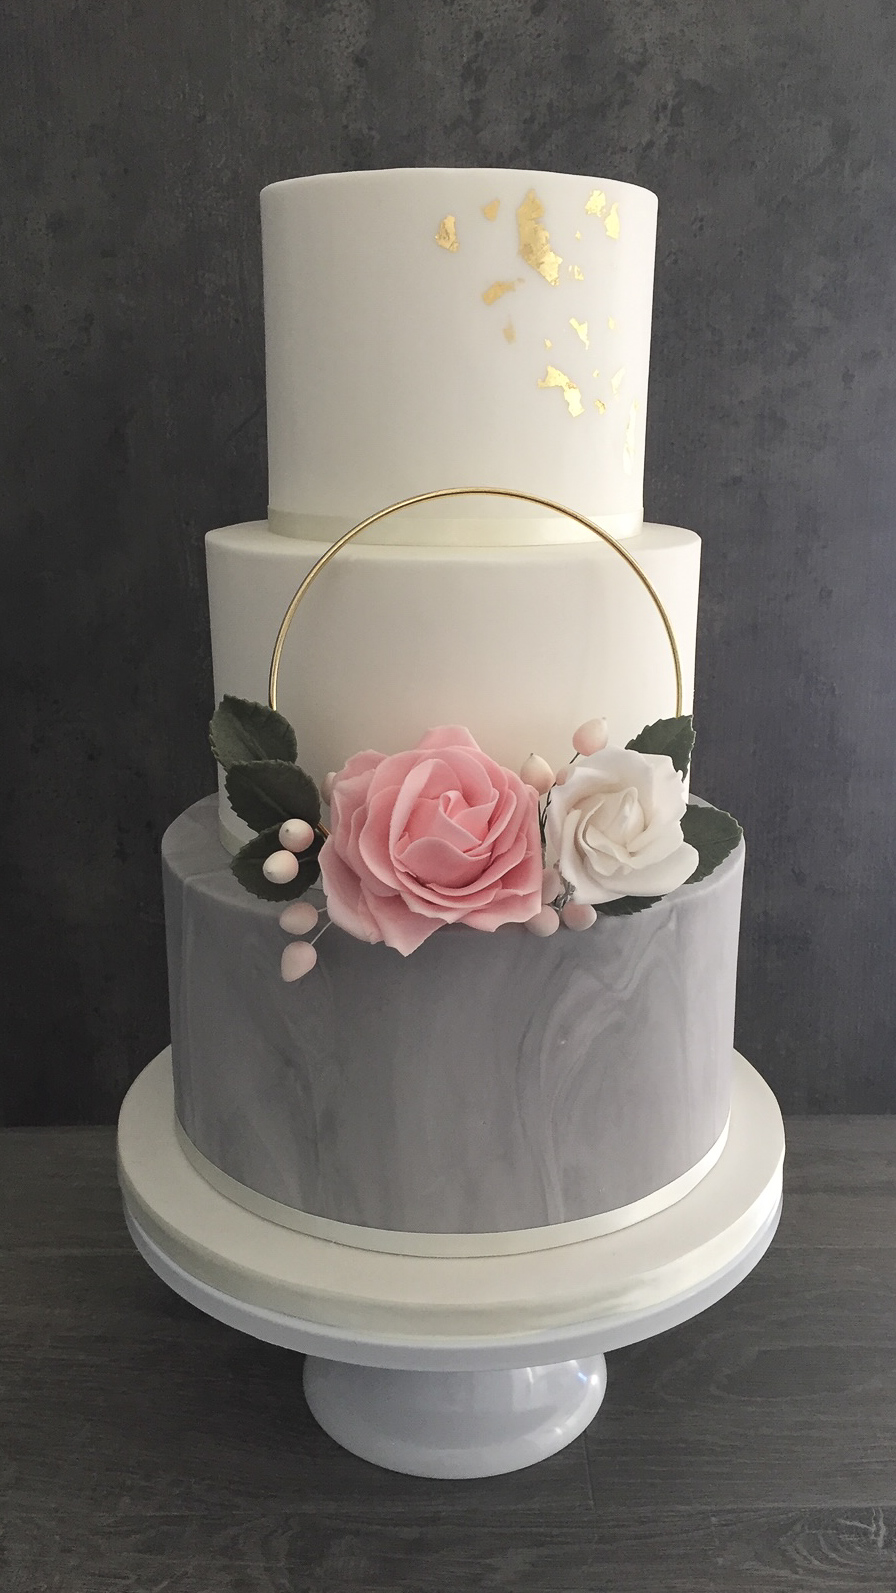 Three-tier wedding cake with floral hoop and edible gold leaf